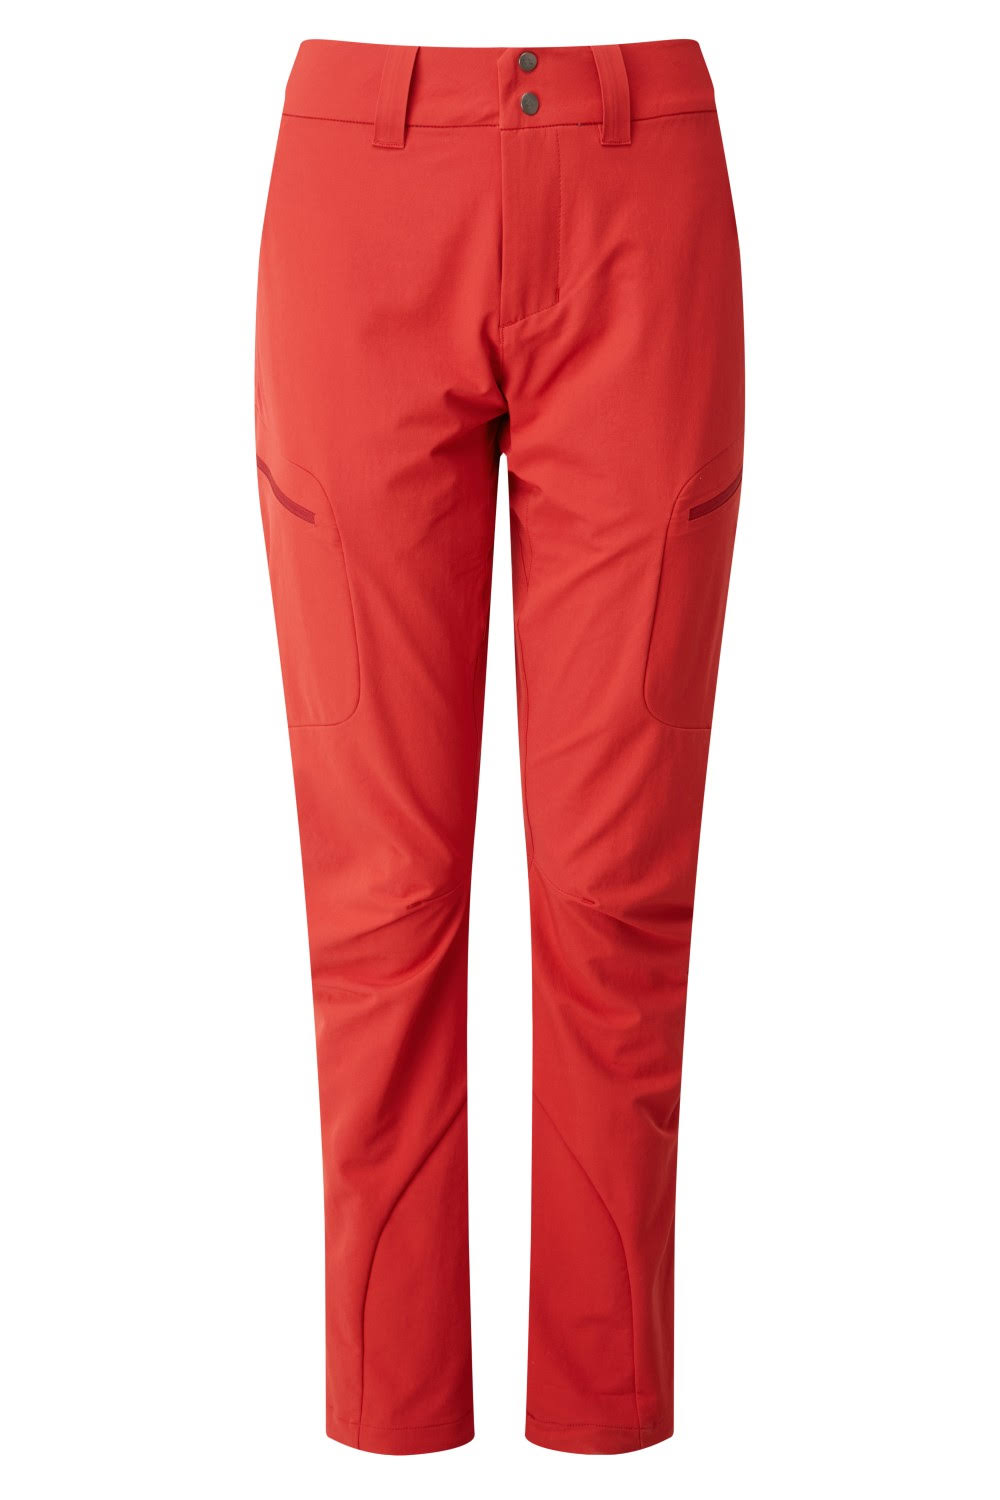 Rab Women's Sawtooth Trousers (Size S, Red)